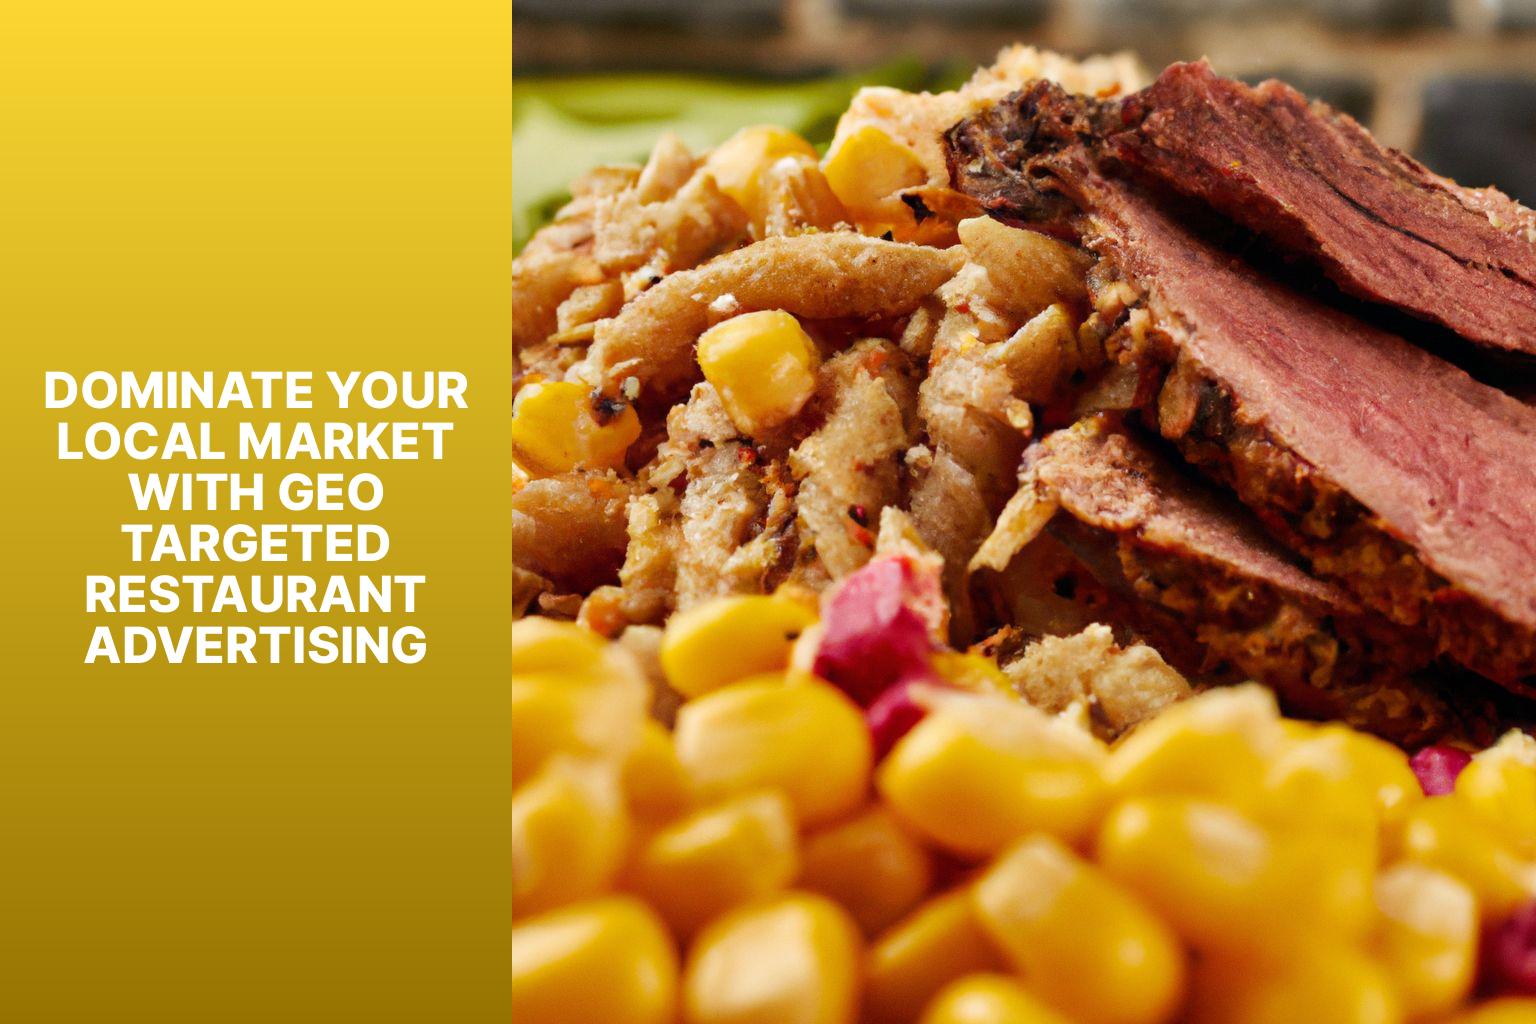 Dominate Your Local Market with Geo Targeted Restaurant Advertising